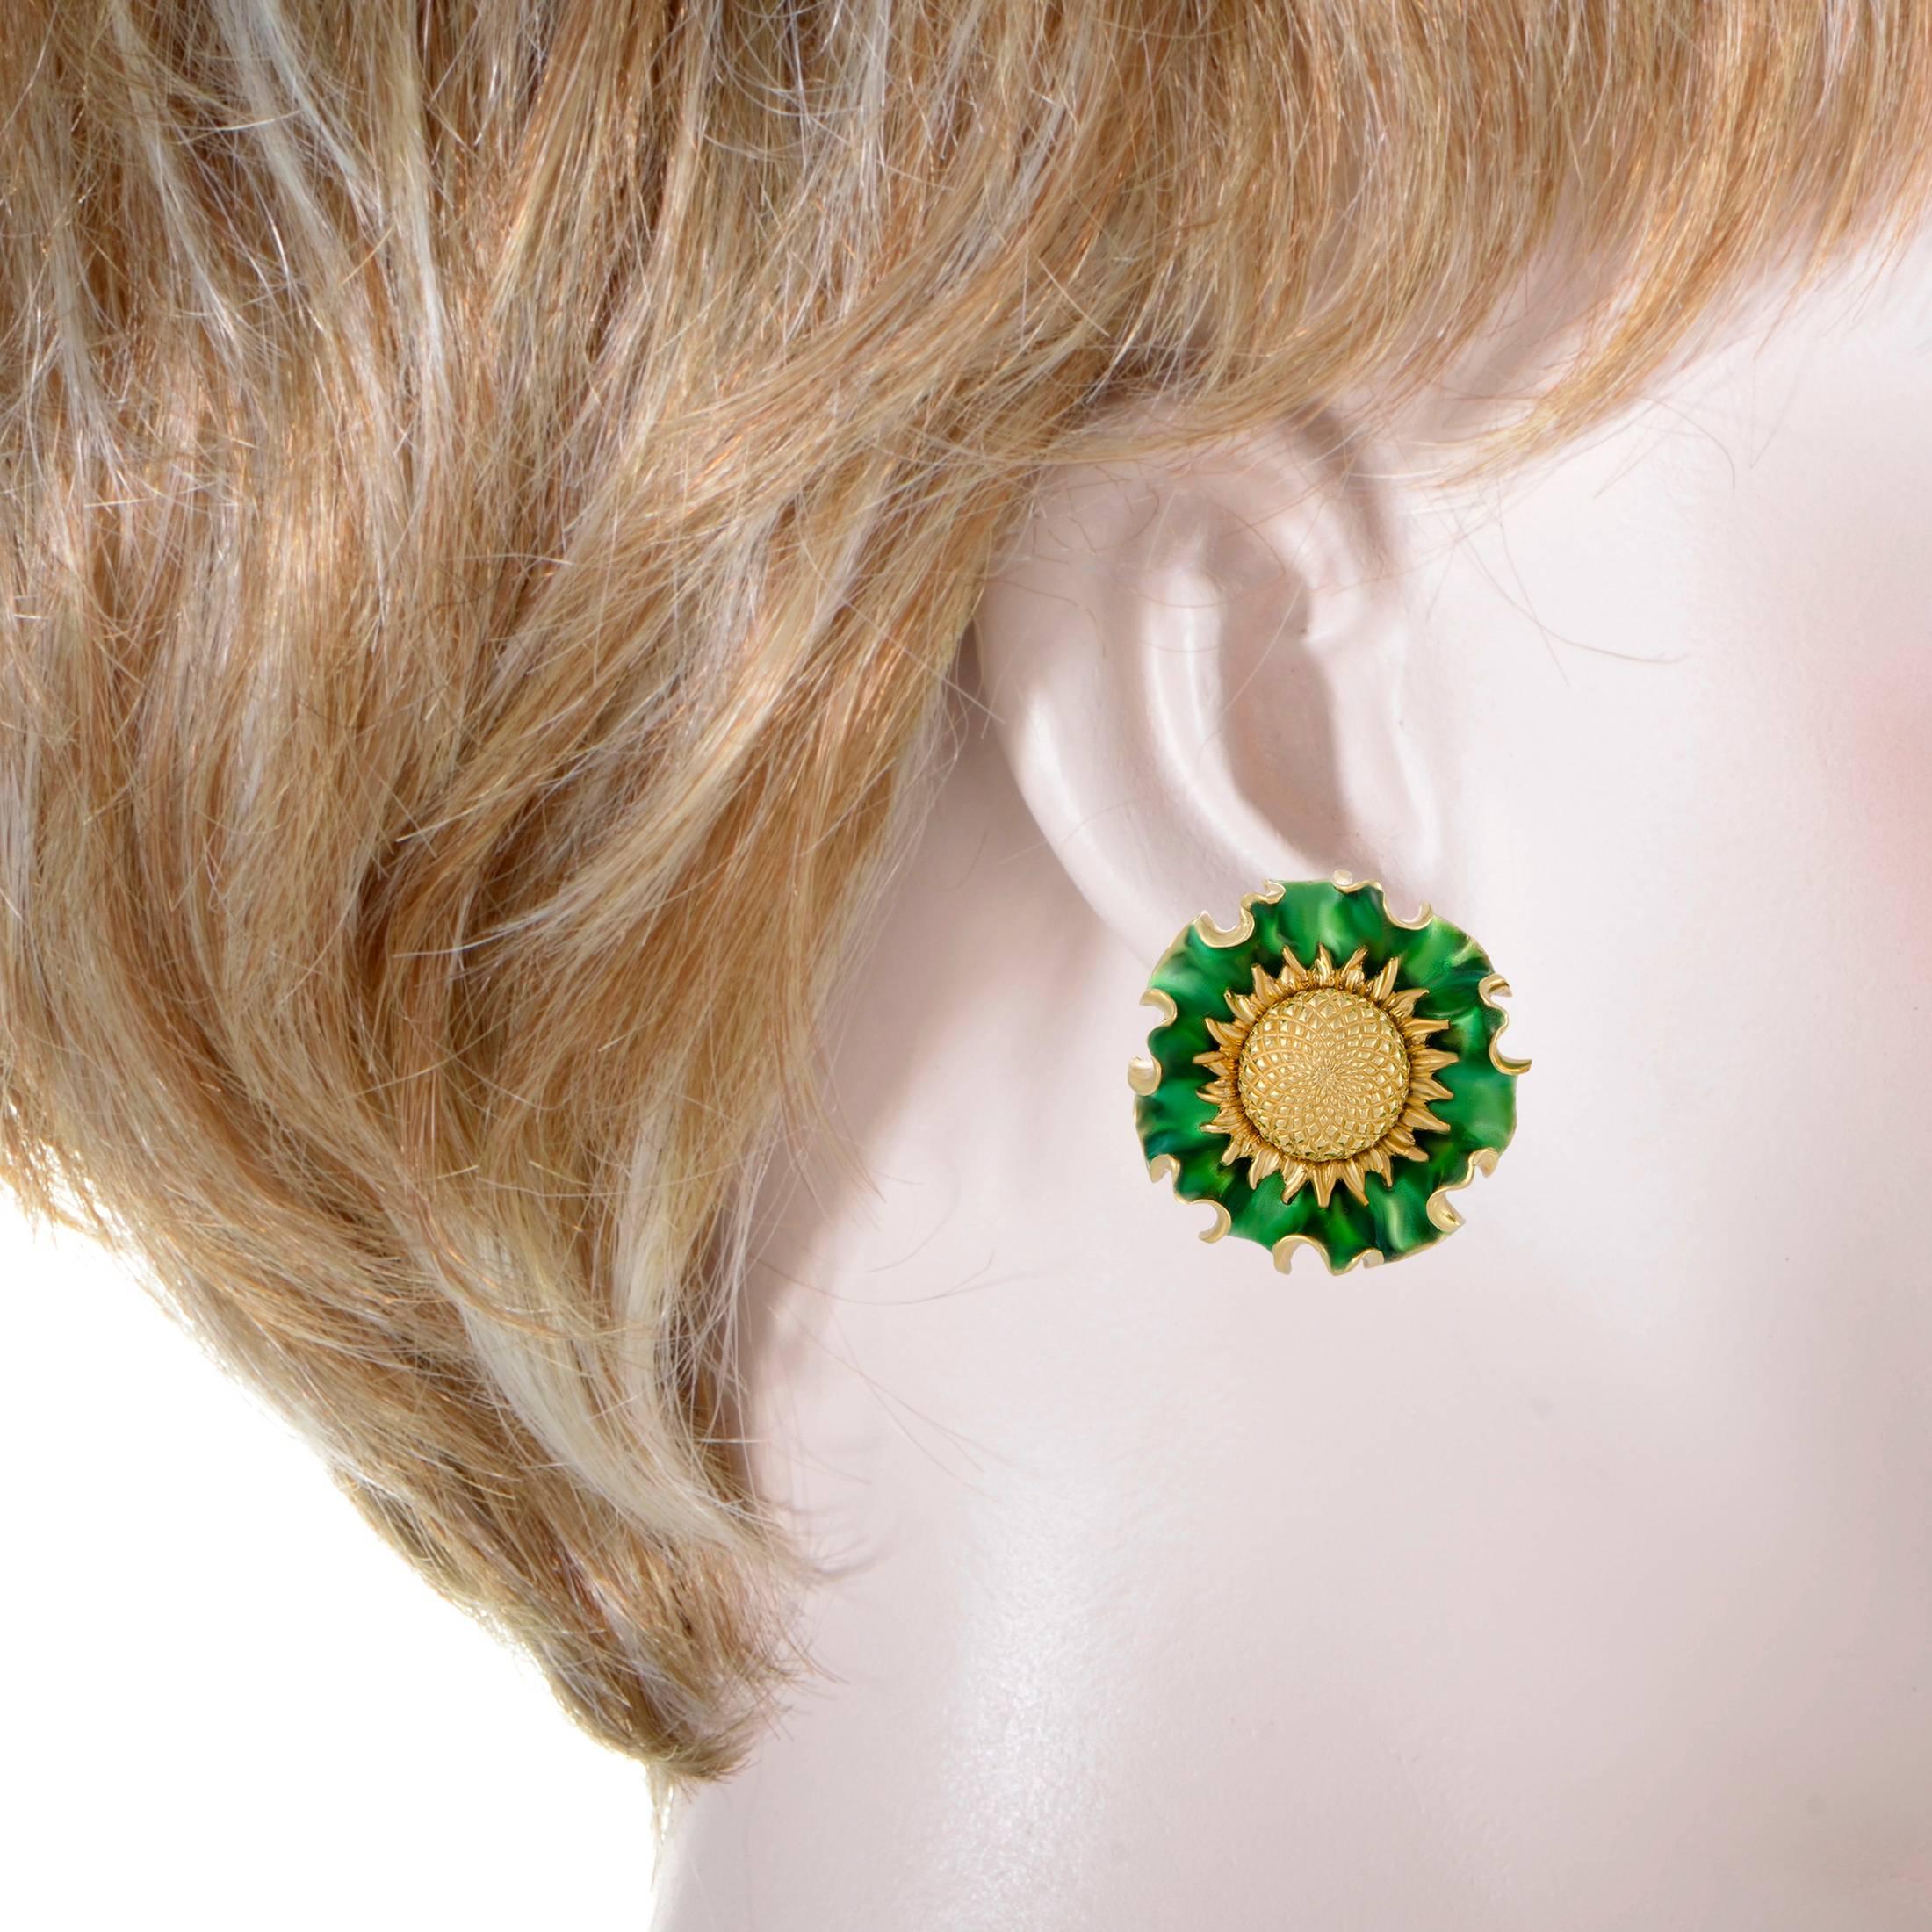 The captivating green enamel and the extraordinary 20K yellow gold combine splendidly in these earrings into creating a spectacularly fashionable sight. The pair is designed by Lee Havens and offers eye-catching offbeat appearance.
